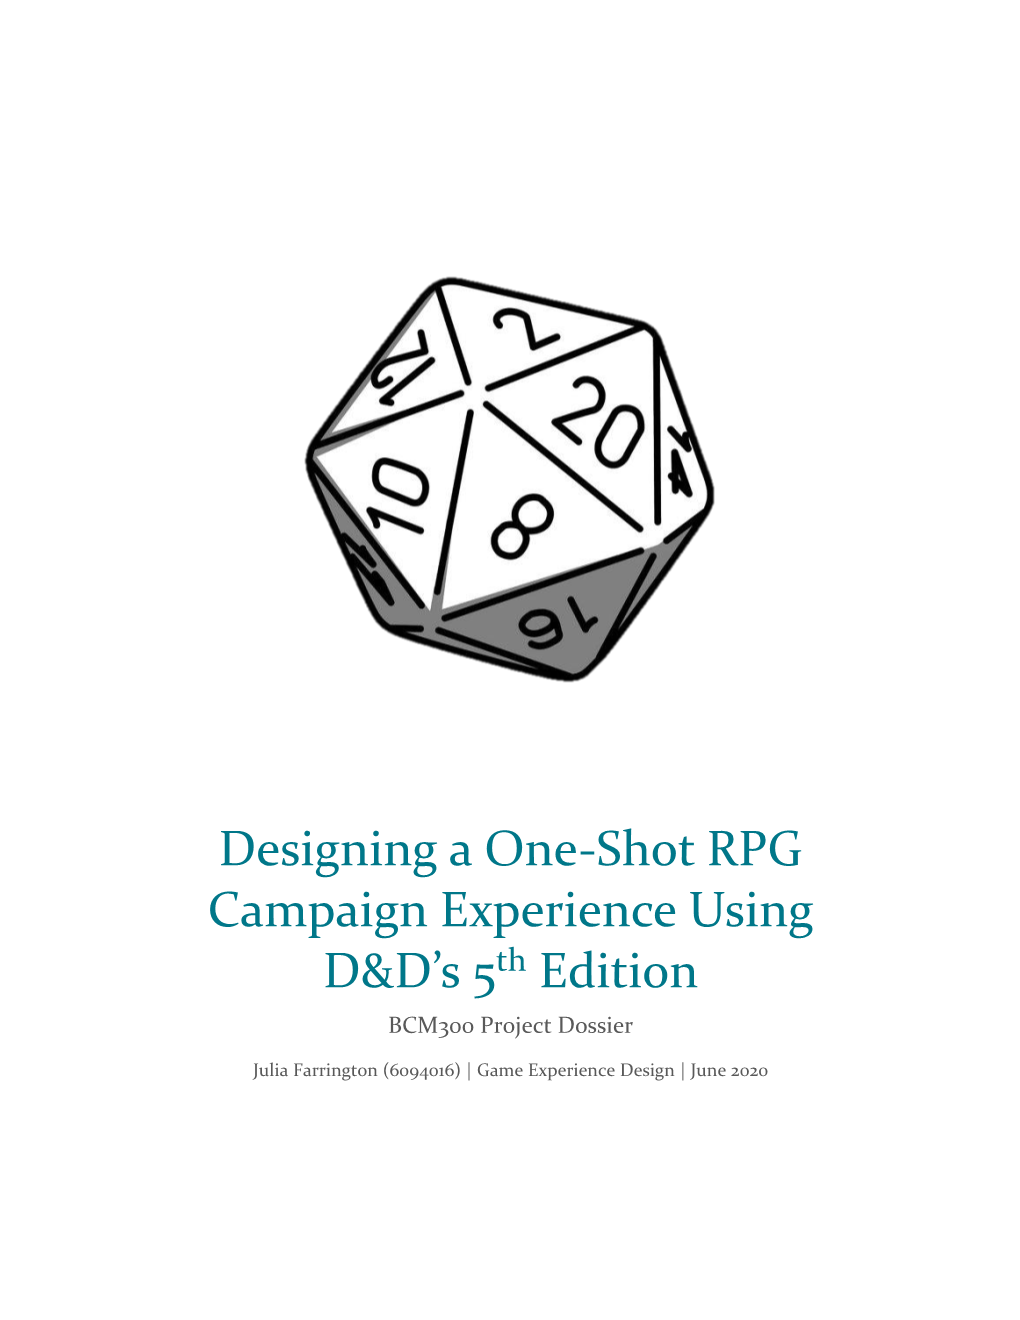 Designing a One-Shot RPG Campaign Experience Using D&D's